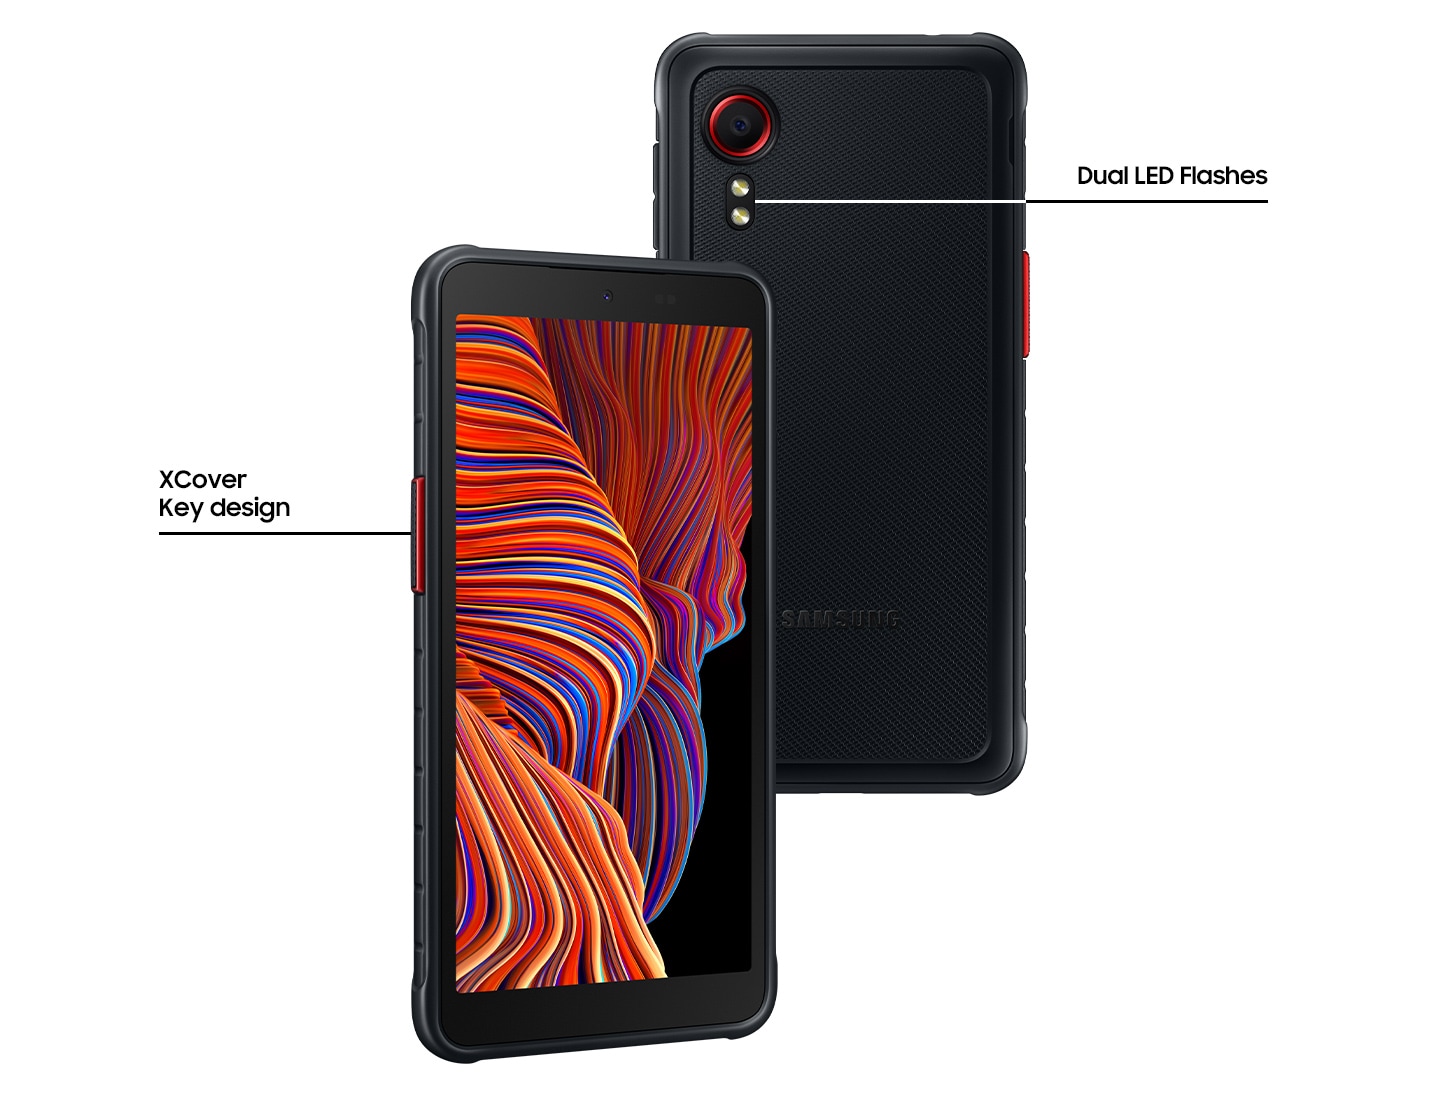 Two Galaxy XCover 5s in black are side by side, slightly overlapping.  The tilted smartphone with the orange line graphics on the display is on the left and shows the XCover Key design.  The other rear view of the Galaxy XCover 5 shows dual LED flashes.